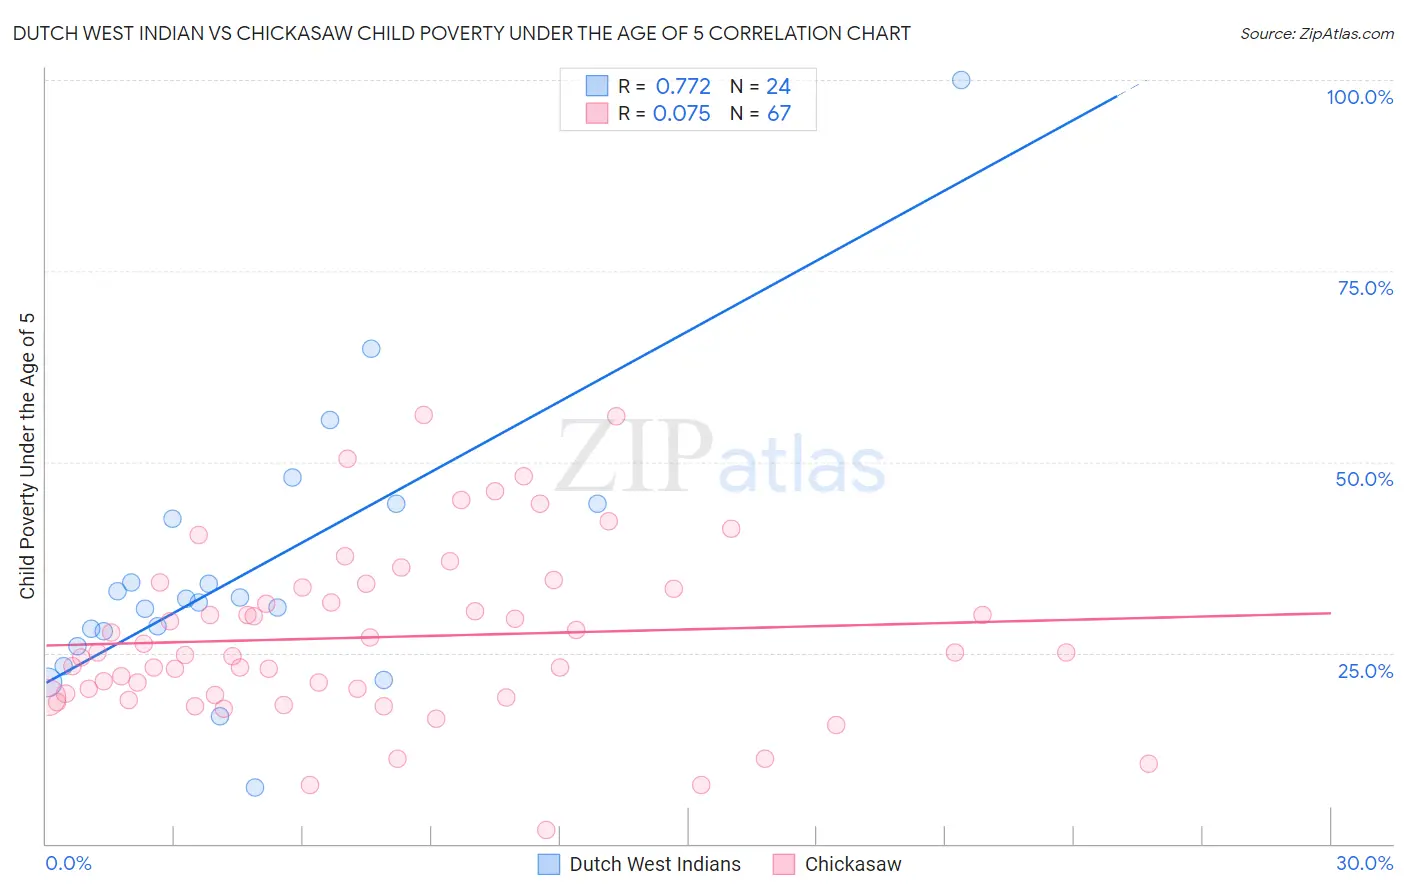 Dutch West Indian vs Chickasaw Child Poverty Under the Age of 5